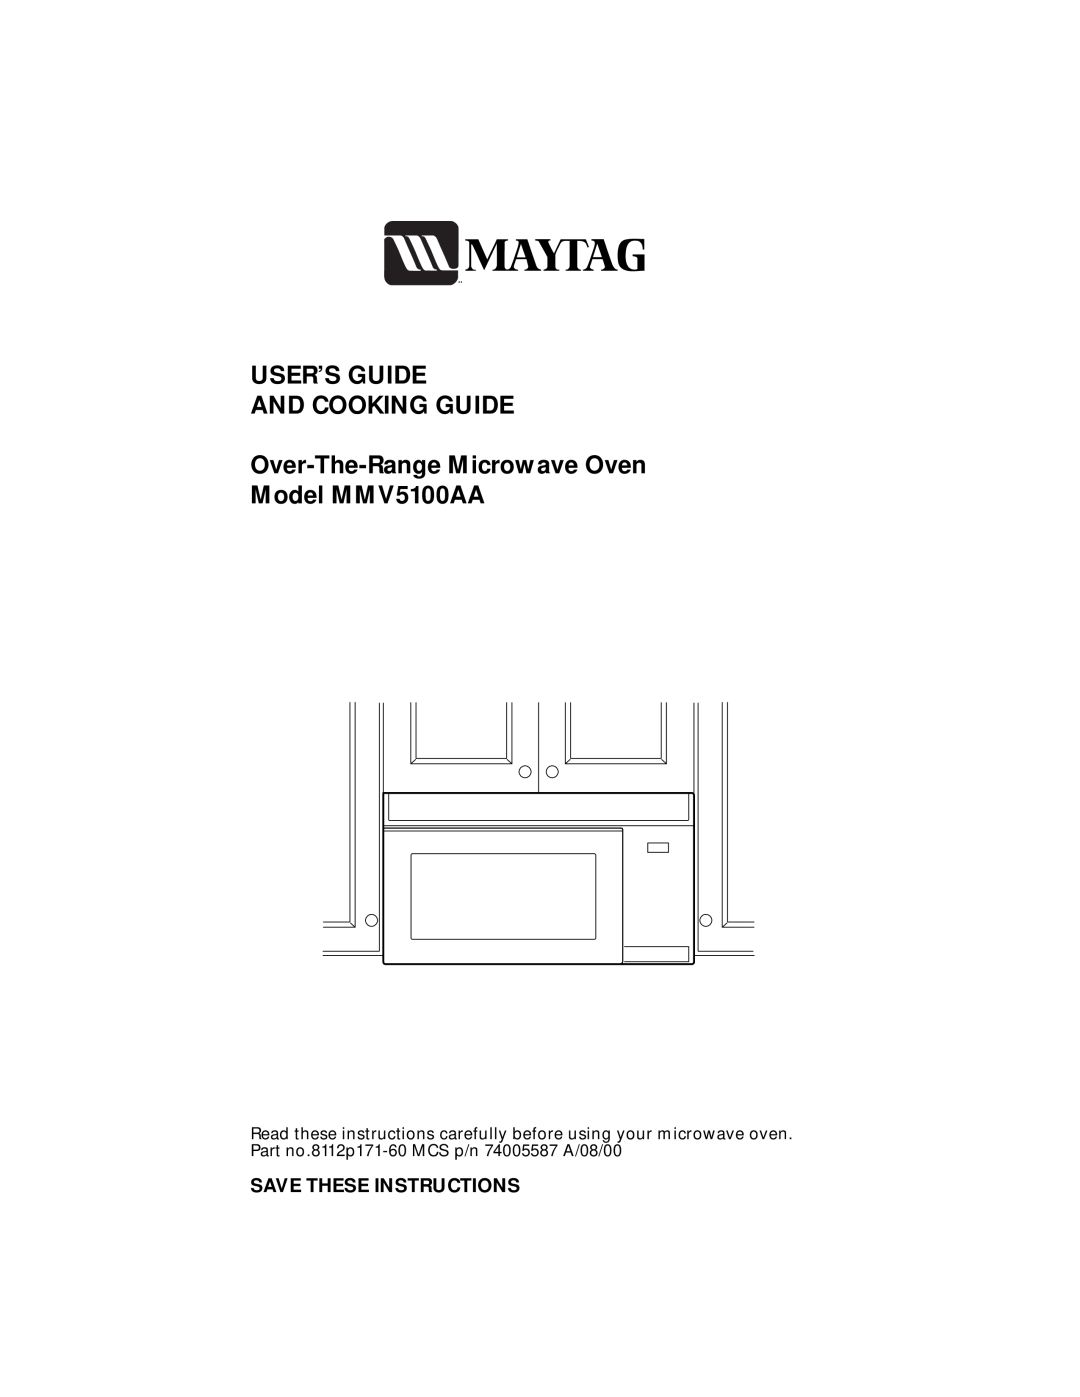 Maytag MMV5100AA manual Save These Instructions, USER’S GUIDE AND COOKING GUIDE Over-The-Range Microwave Oven 